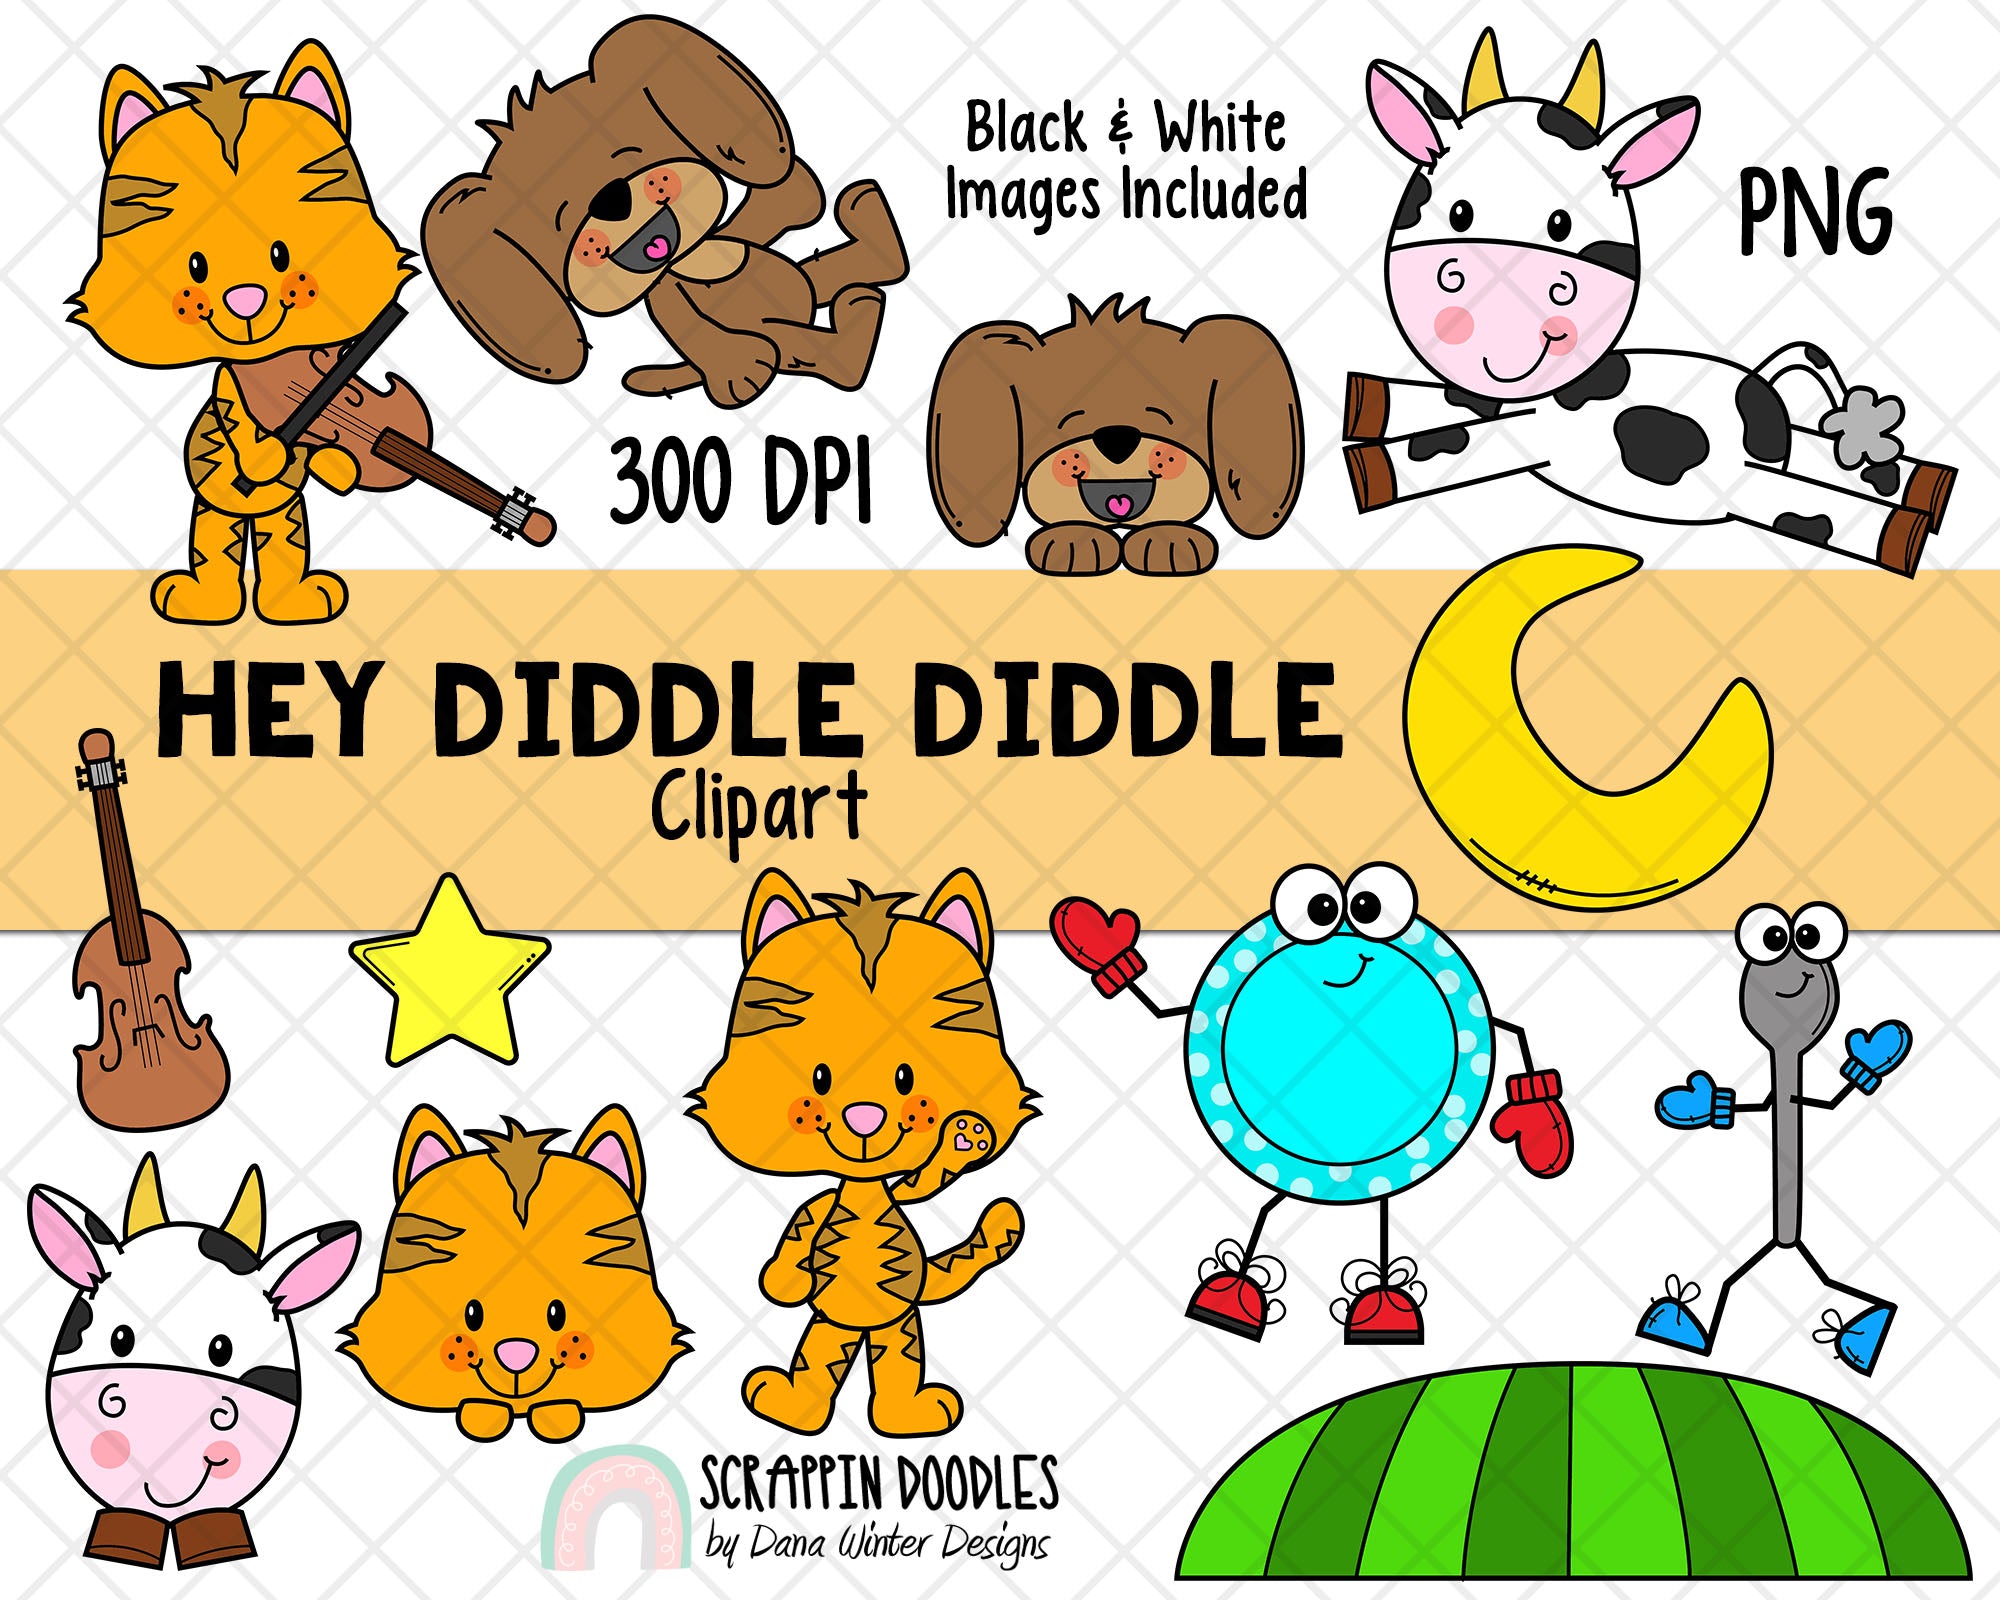 hey diddle diddle clipart